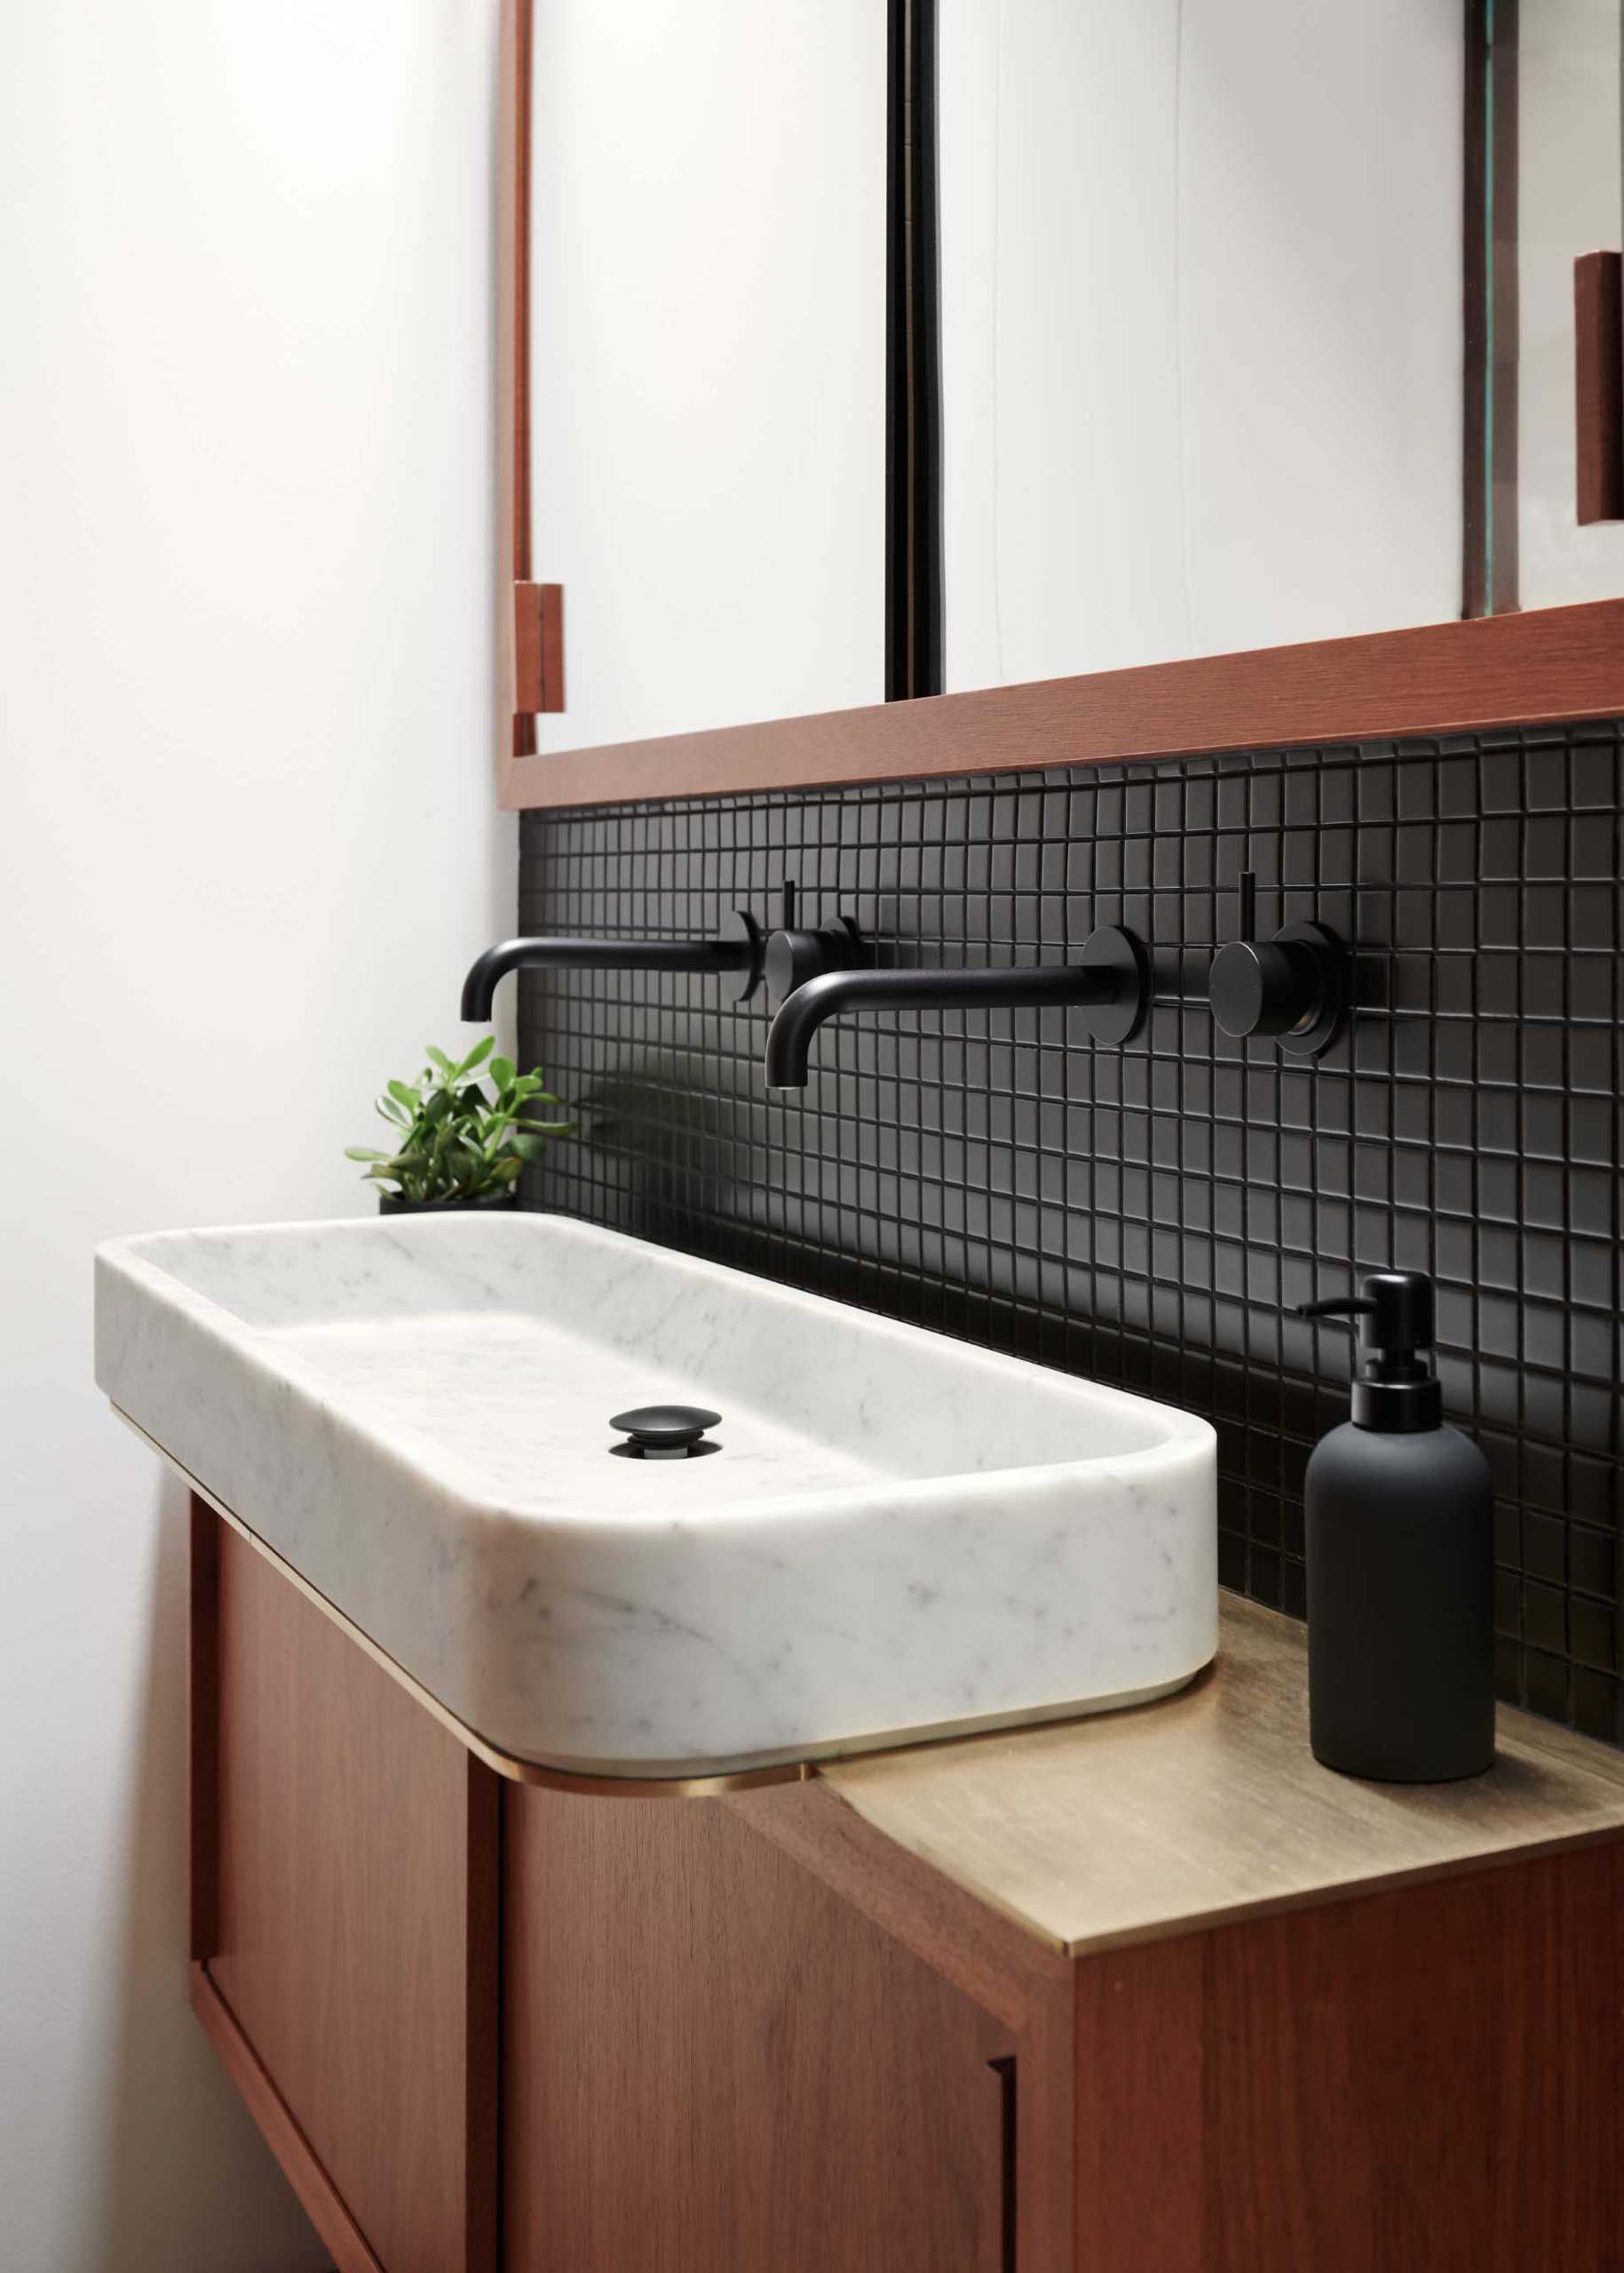 A modern wood vanity with black tiles and matching matte black hardware.